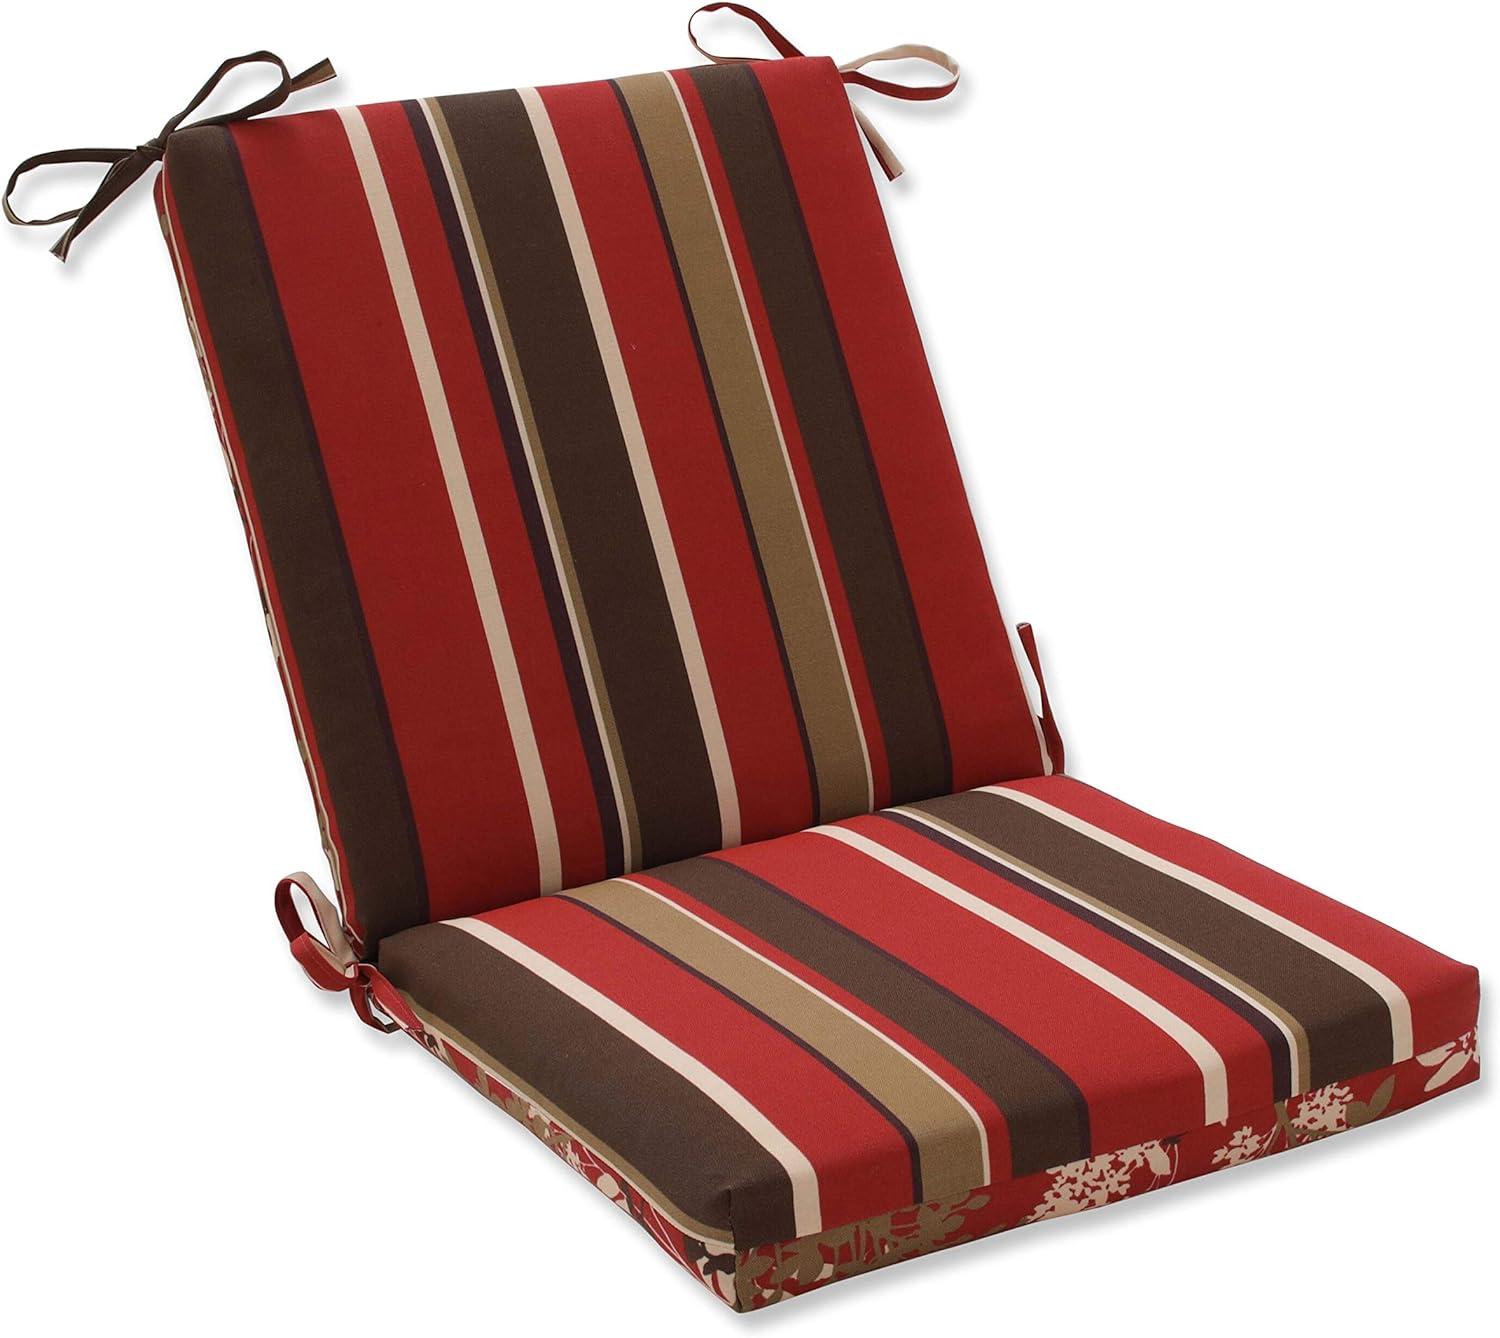 Modern Floral & Stripe Reversible Outdoor Chair Cushion, Brown/Red